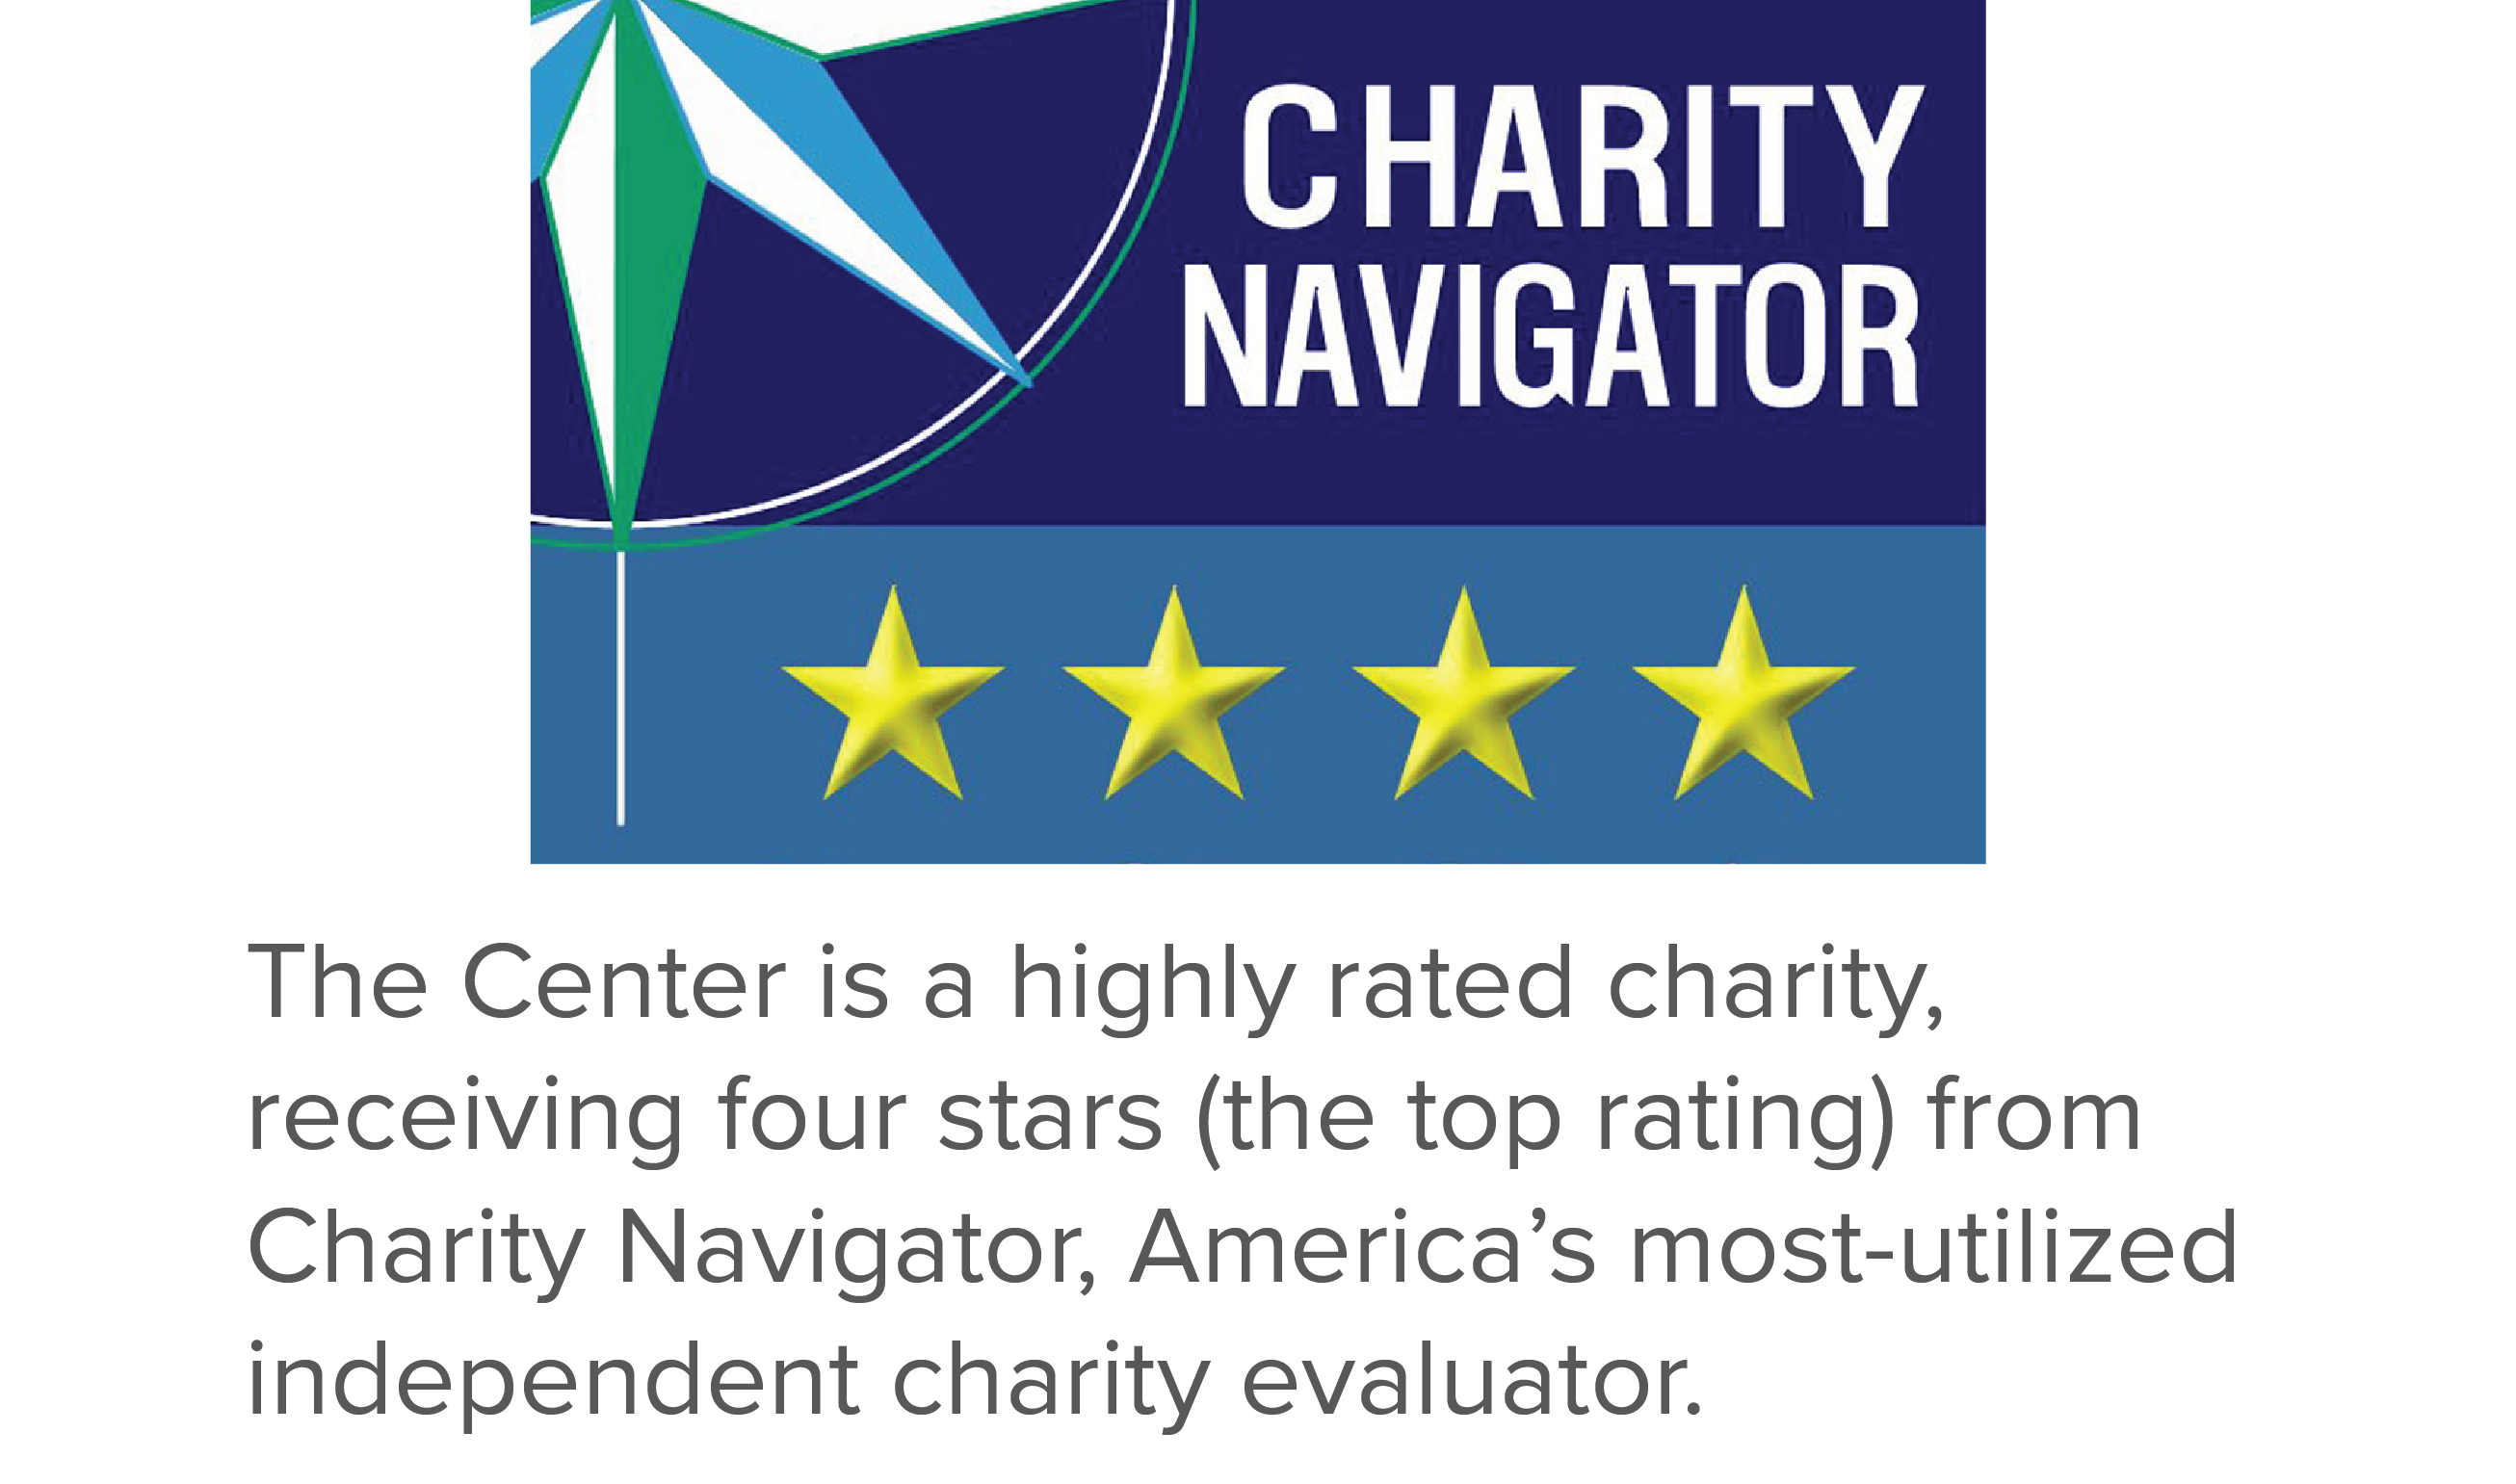 The Center is a highly rated charity, receiving four stars (the top rating) from Charity Navigator, America's most-utilized independent charity evaluator.